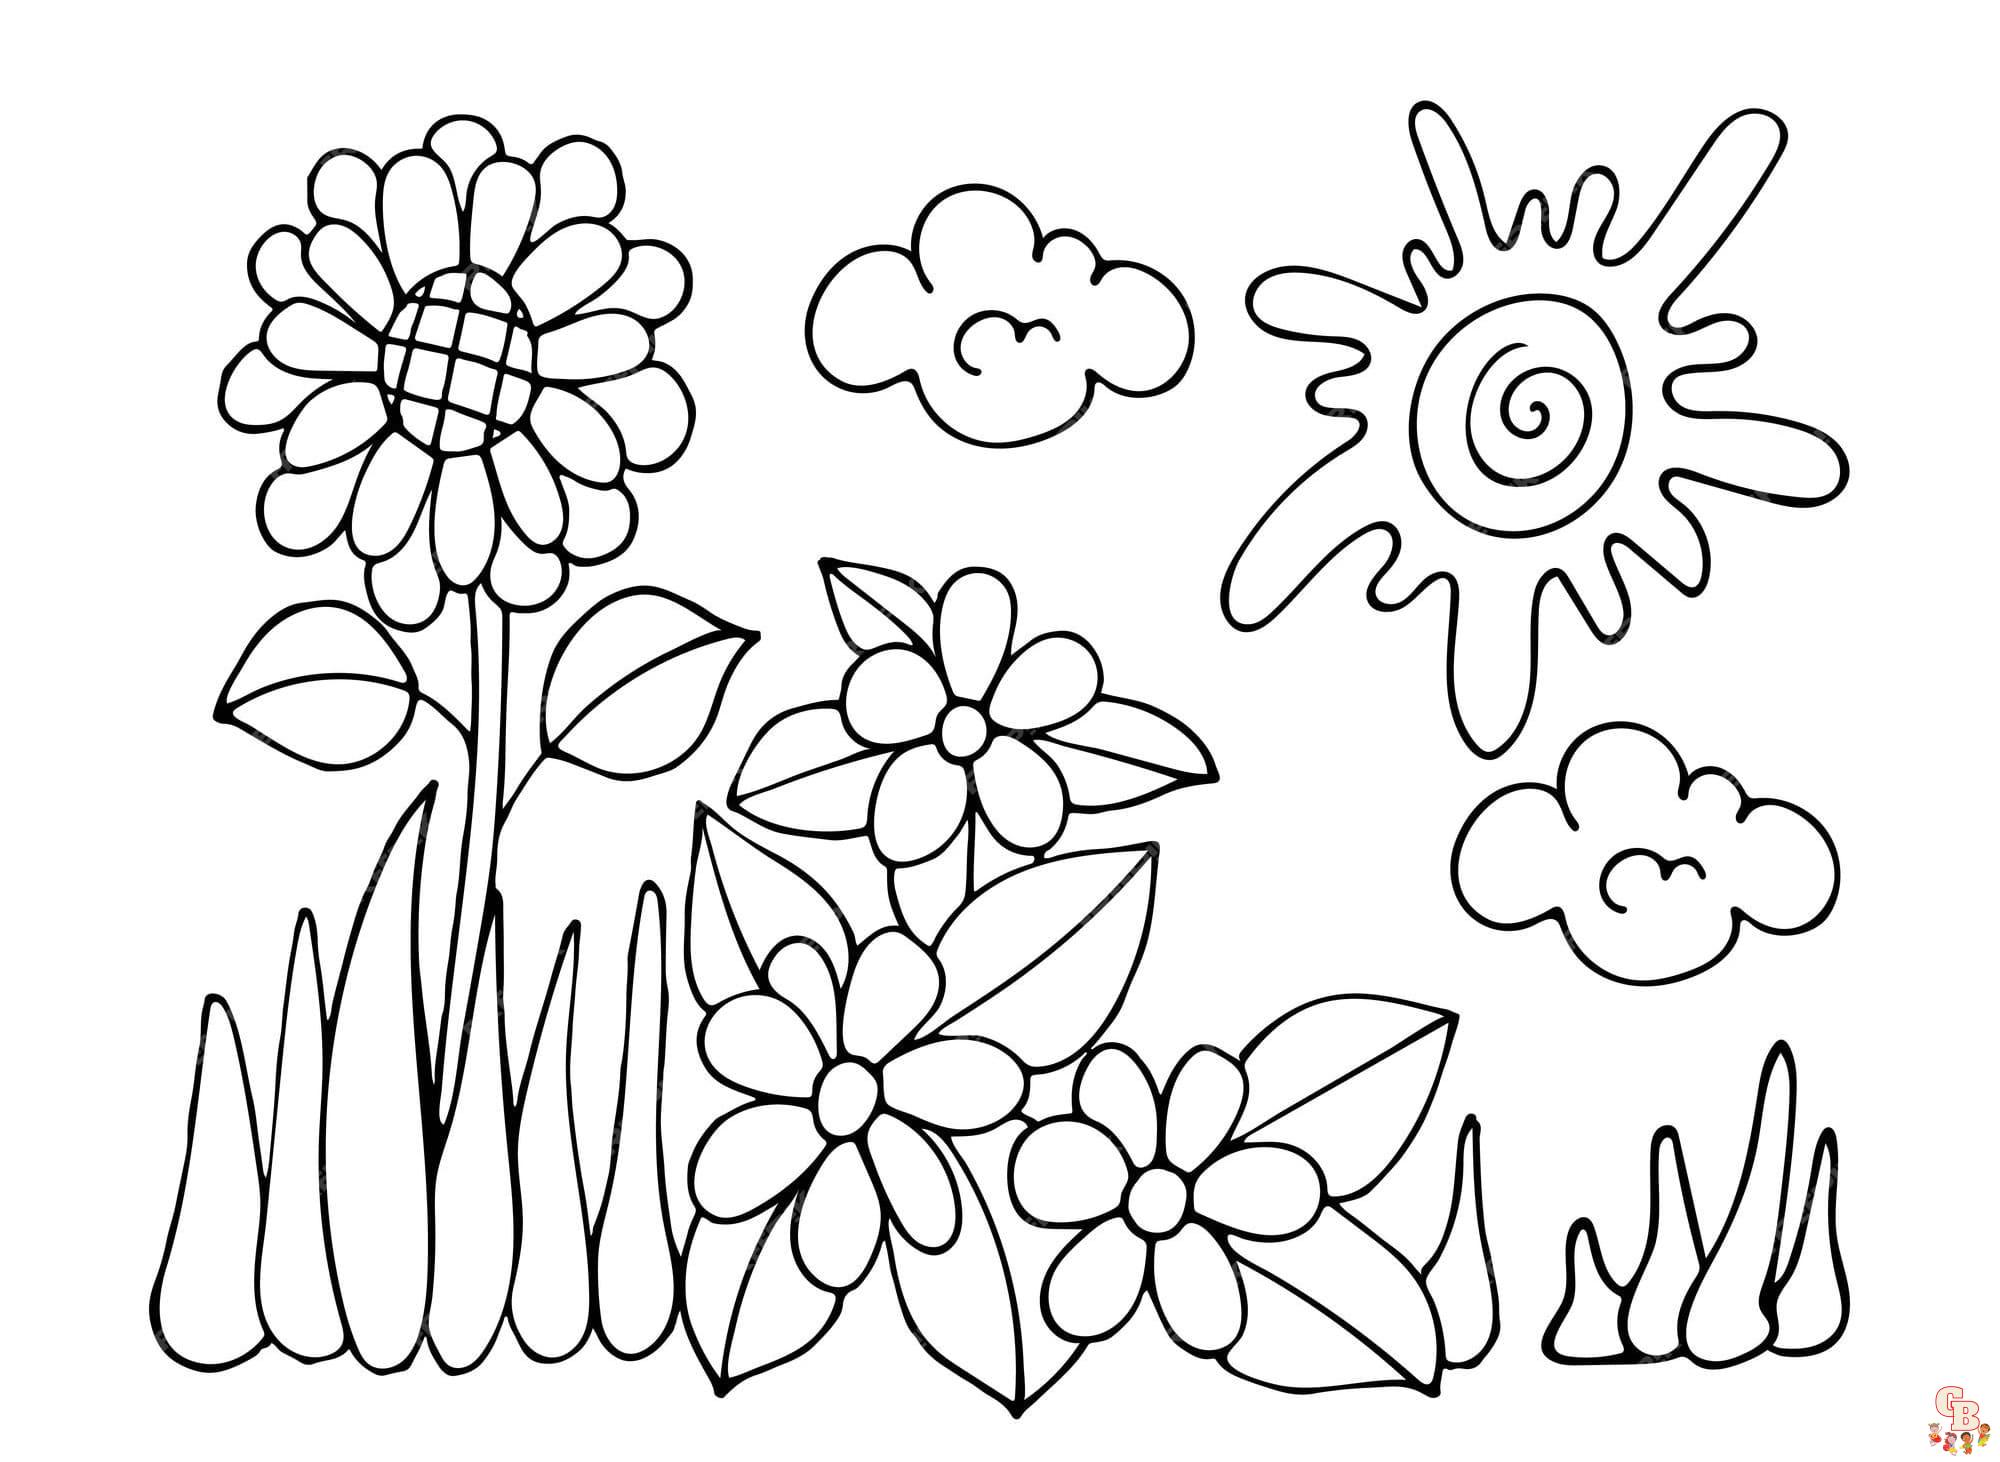 Grass Coloring Pages